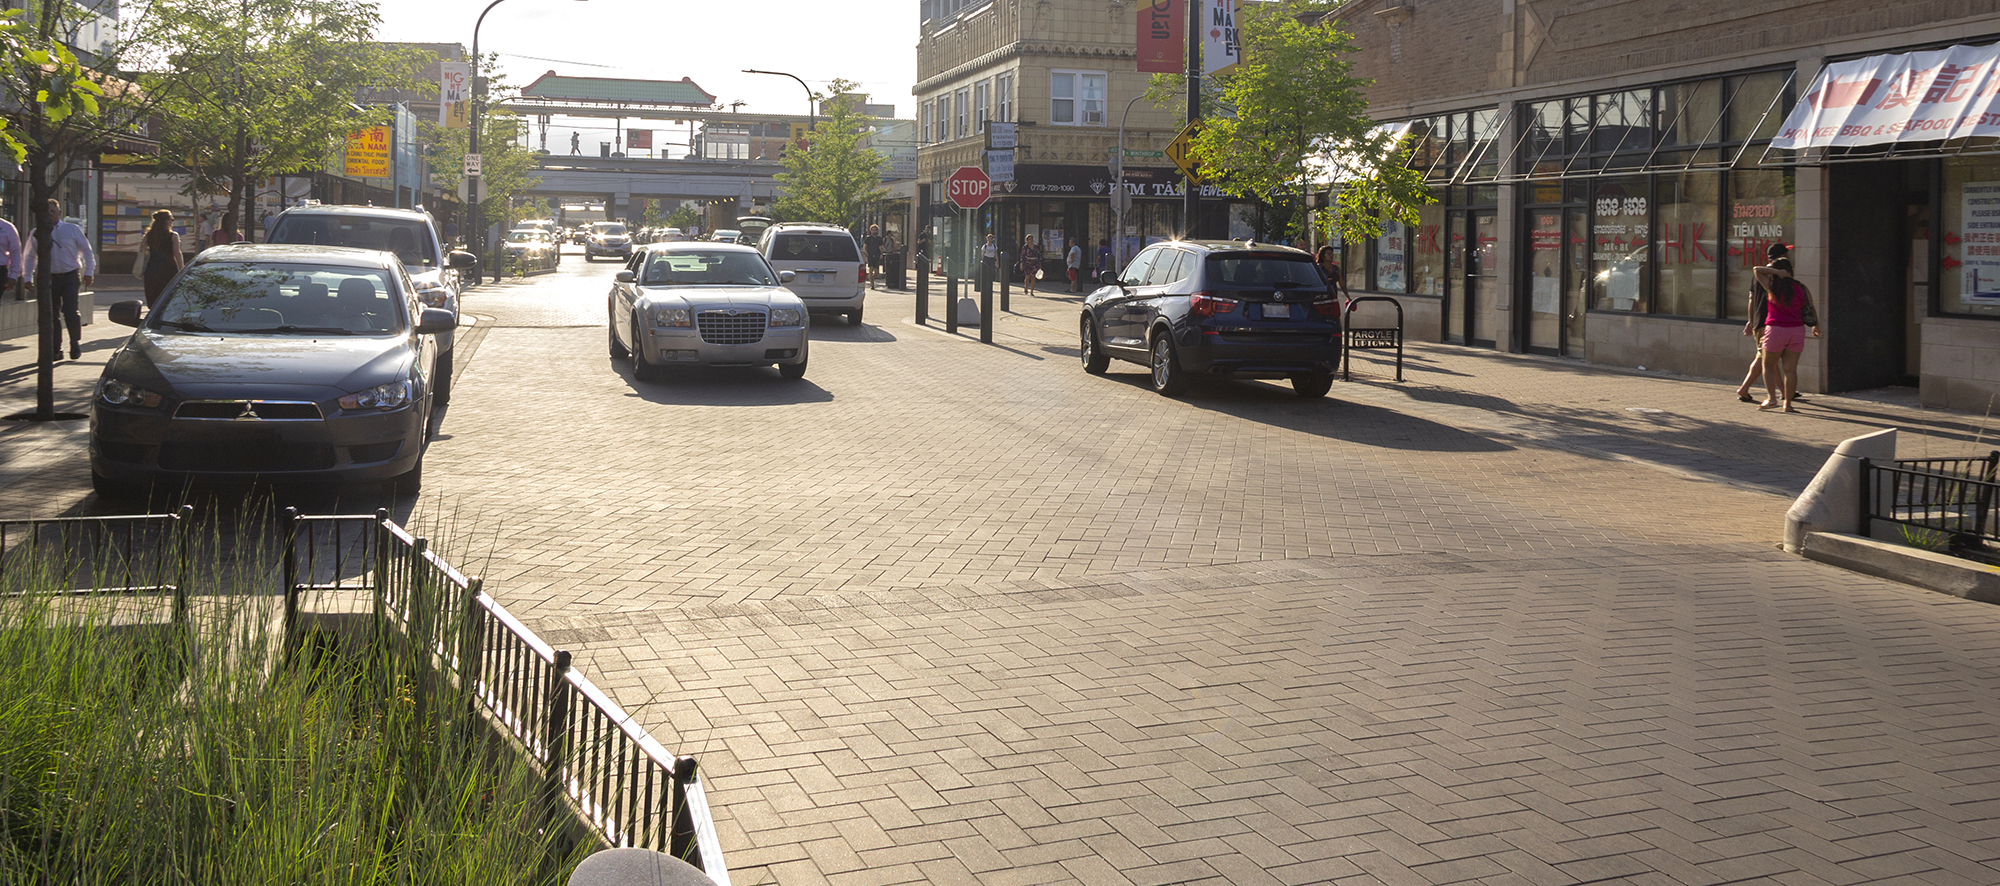 Unilock Eco-Priora pave Argyle Street roadway and sidewalk. People walk on the treelined sidewalk as cars park and drive on the road.